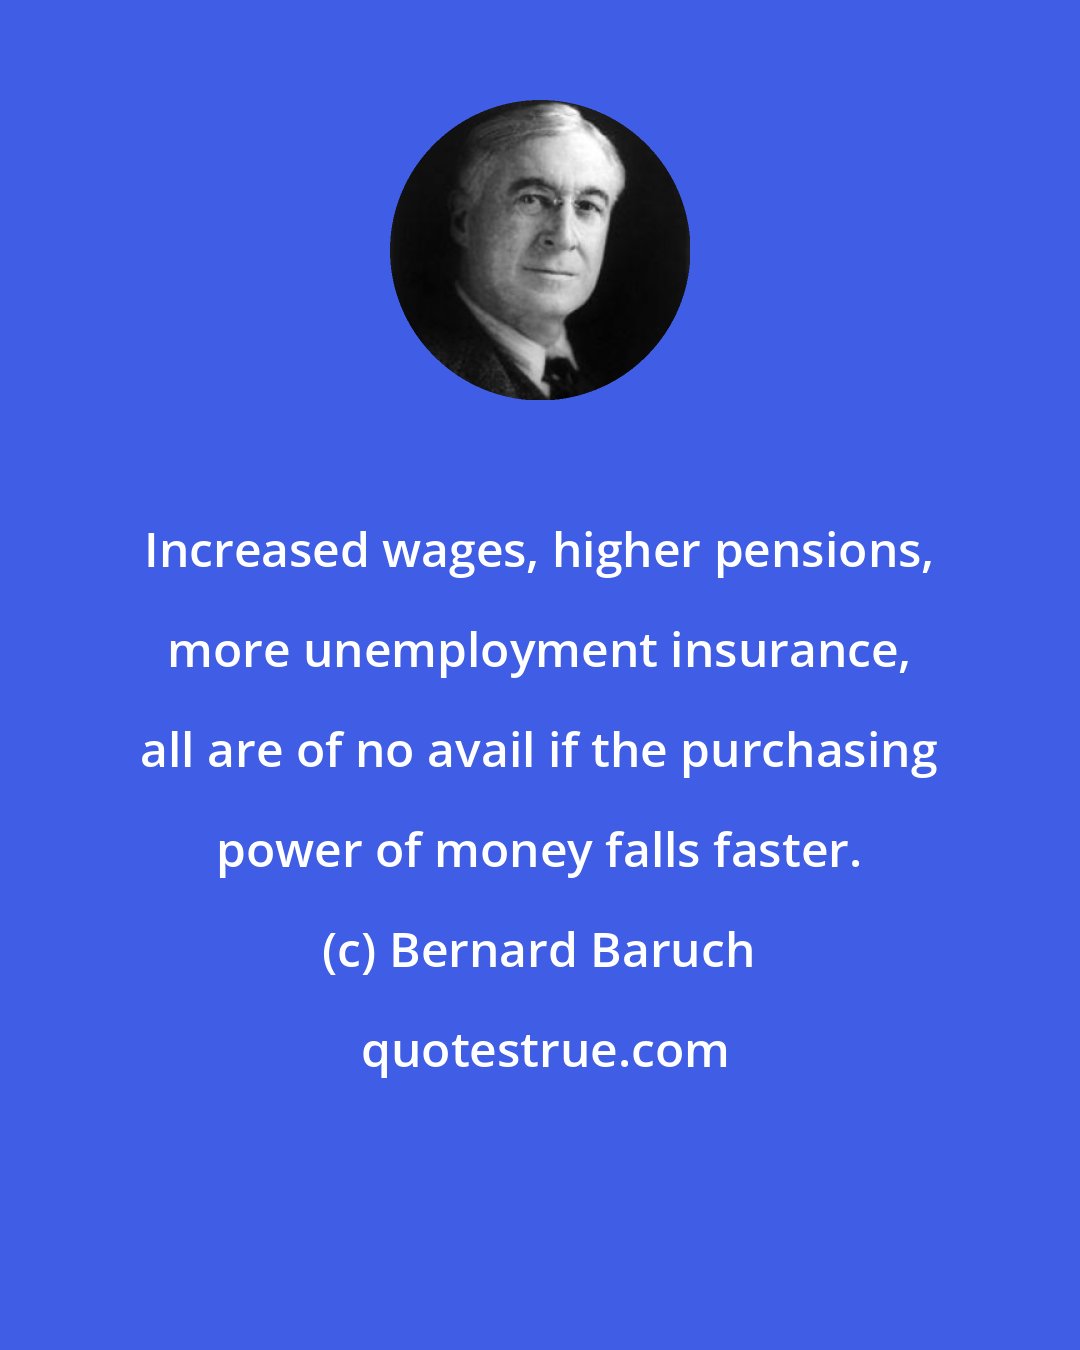 Bernard Baruch: Increased wages, higher pensions, more unemployment insurance, all are of no avail if the purchasing power of money falls faster.